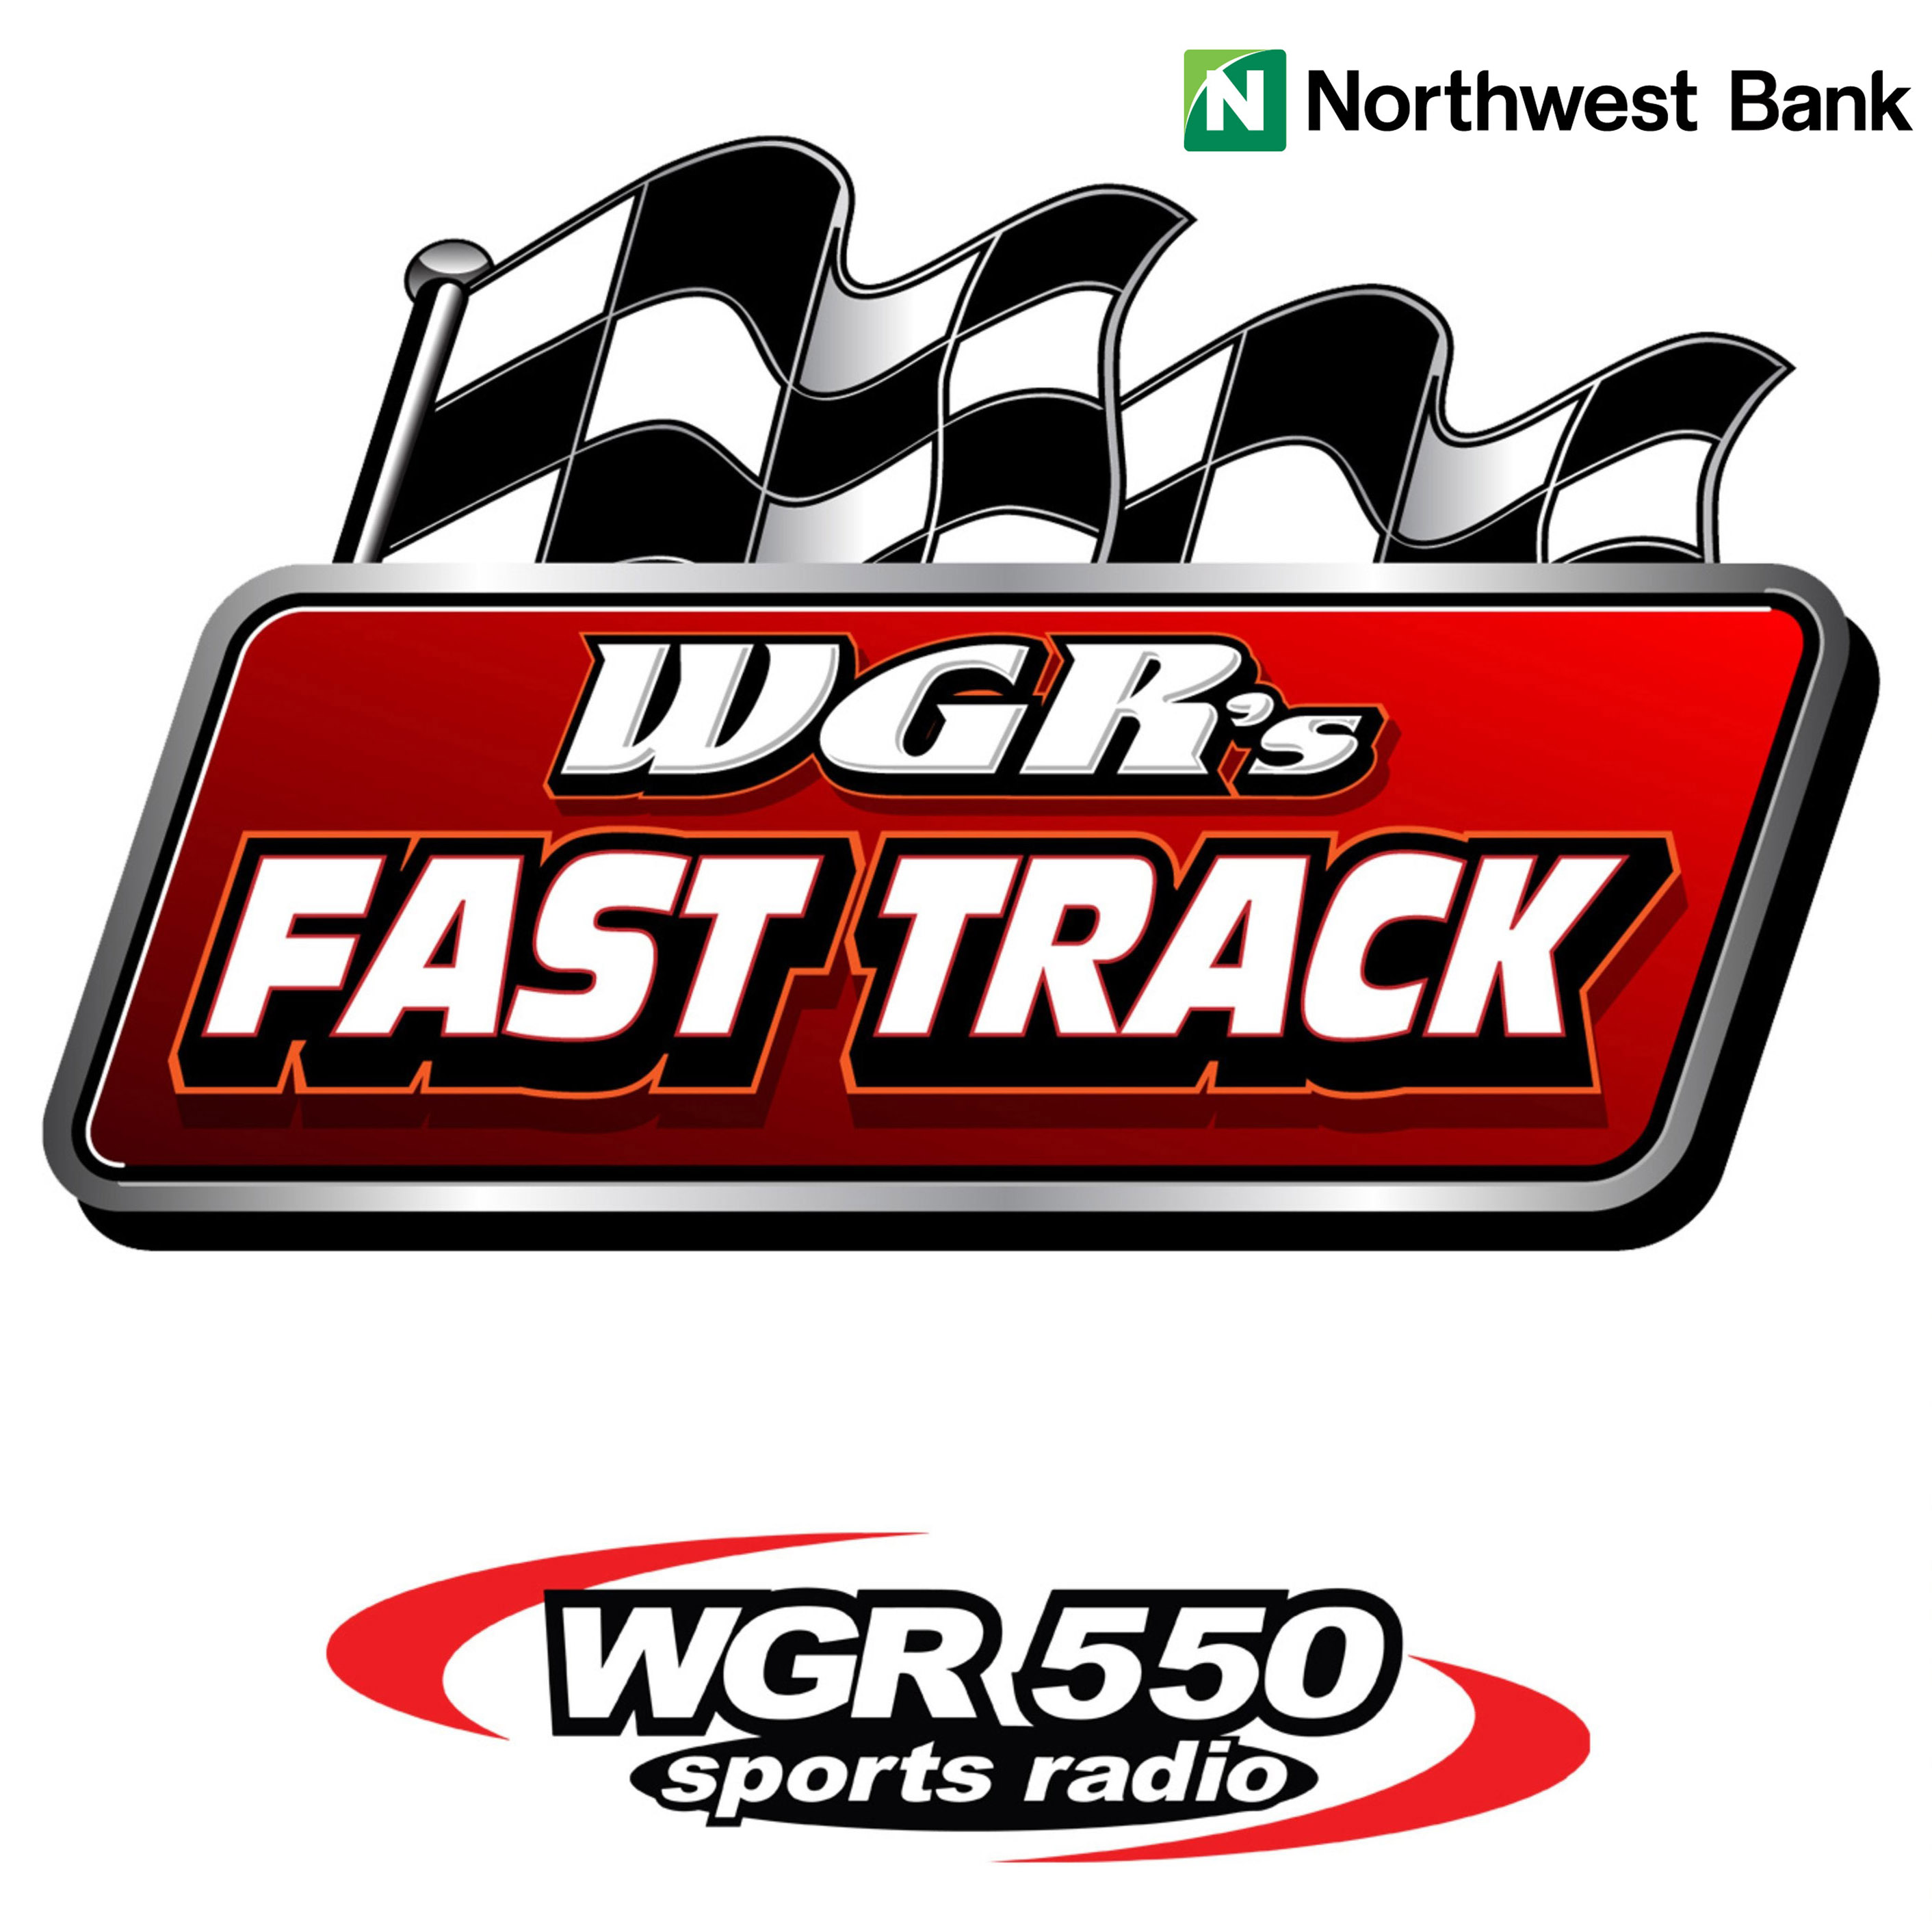 02-23 WGR's Fast Track with Dave Buchanan